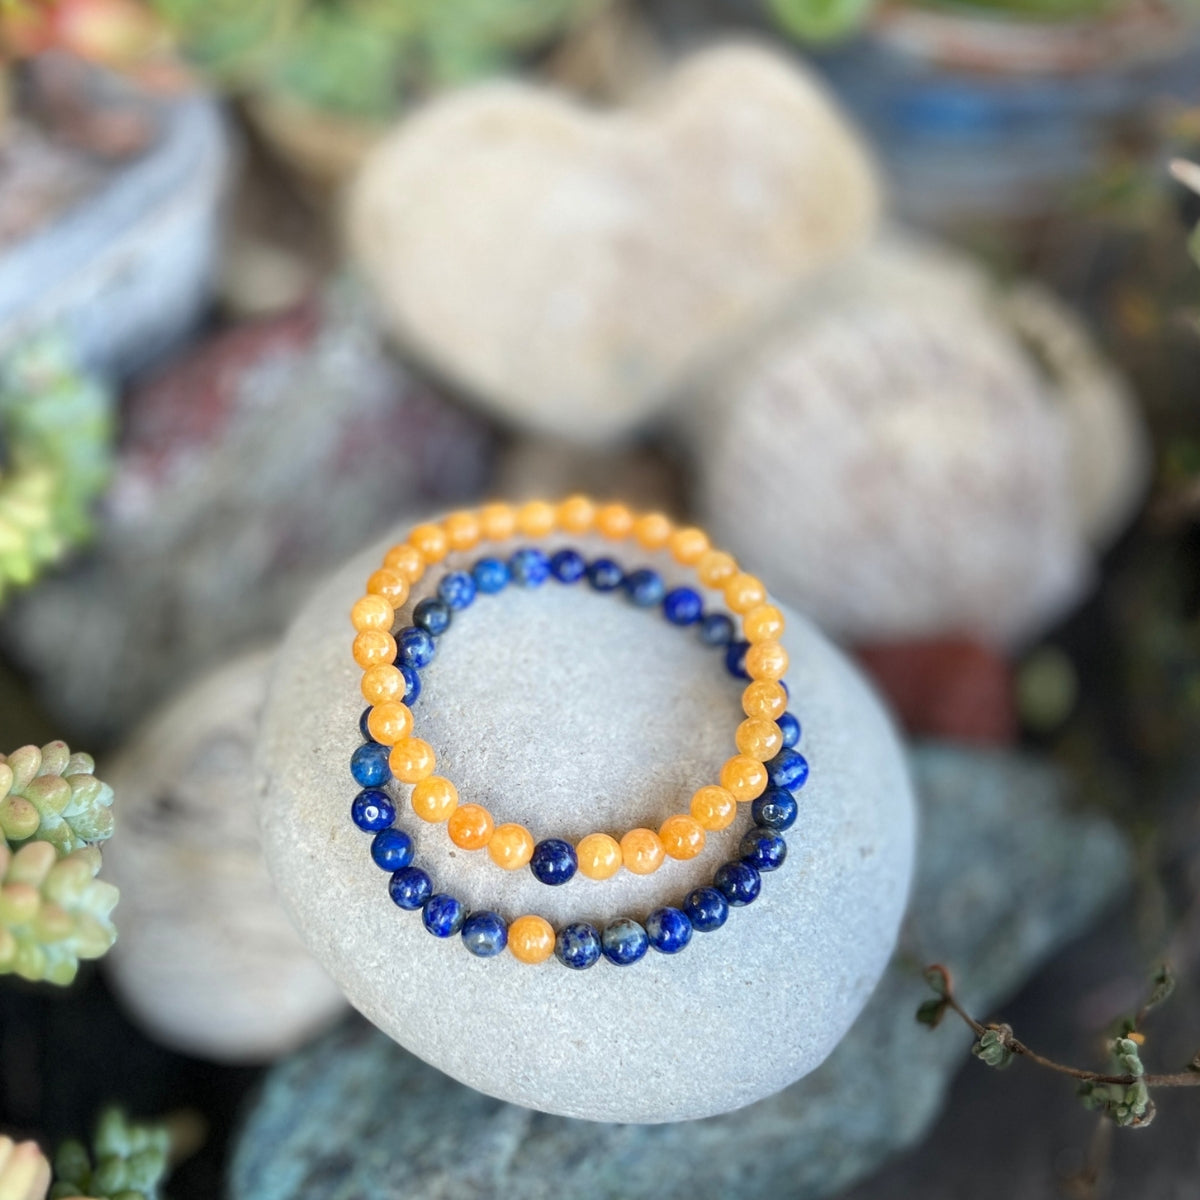 This healing gemstone bracelet pair will have you two lovestruck in a grounded Earthy way.  Spoil yourself and your love with these TWOgether Bracelets! Lapis Lazuli and Honey Calcite Bracelet Pair 🖤 🤍 for those couples who prefer less bling and more mindfulness in their lives.    Say "I love you" with this healing gemstone bracelet pair. It connects you two in a special bond.📿❤️